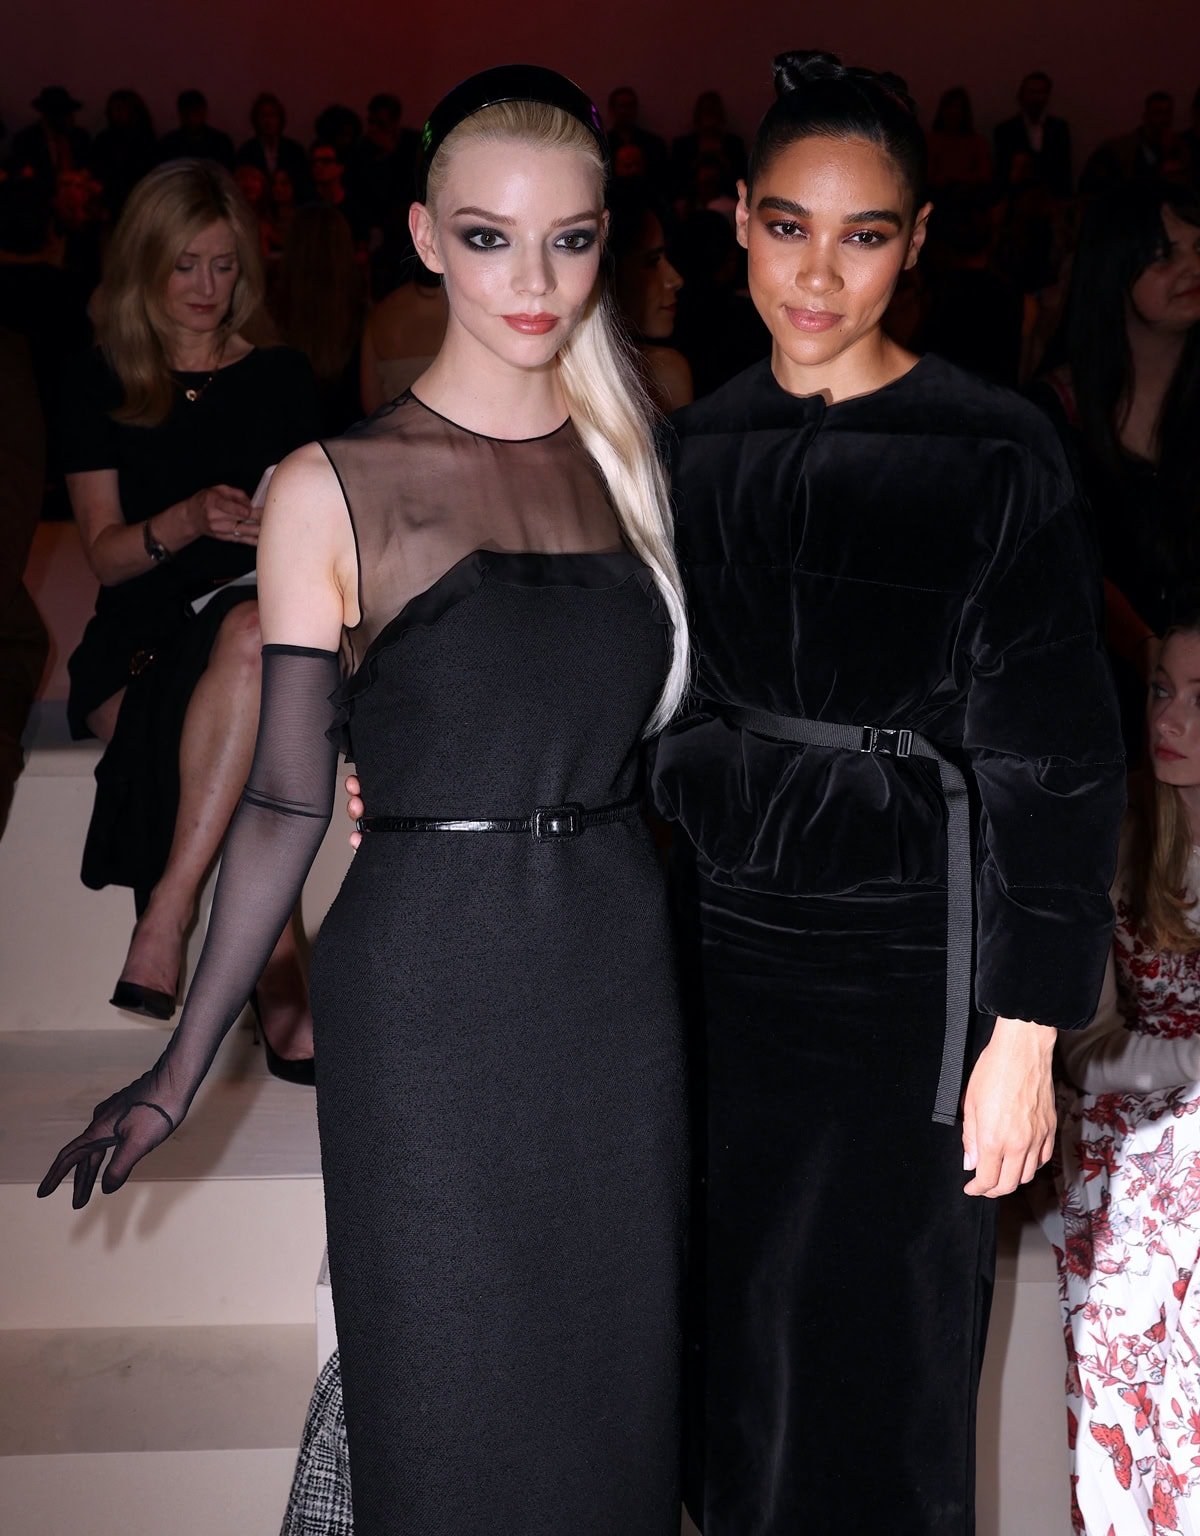 Anya Taylor-Joy and Alexandra Shipp radiated elegance at the Dior show, where they showcased their impeccable style in distinctly sophisticated yet uniquely personal ensembles